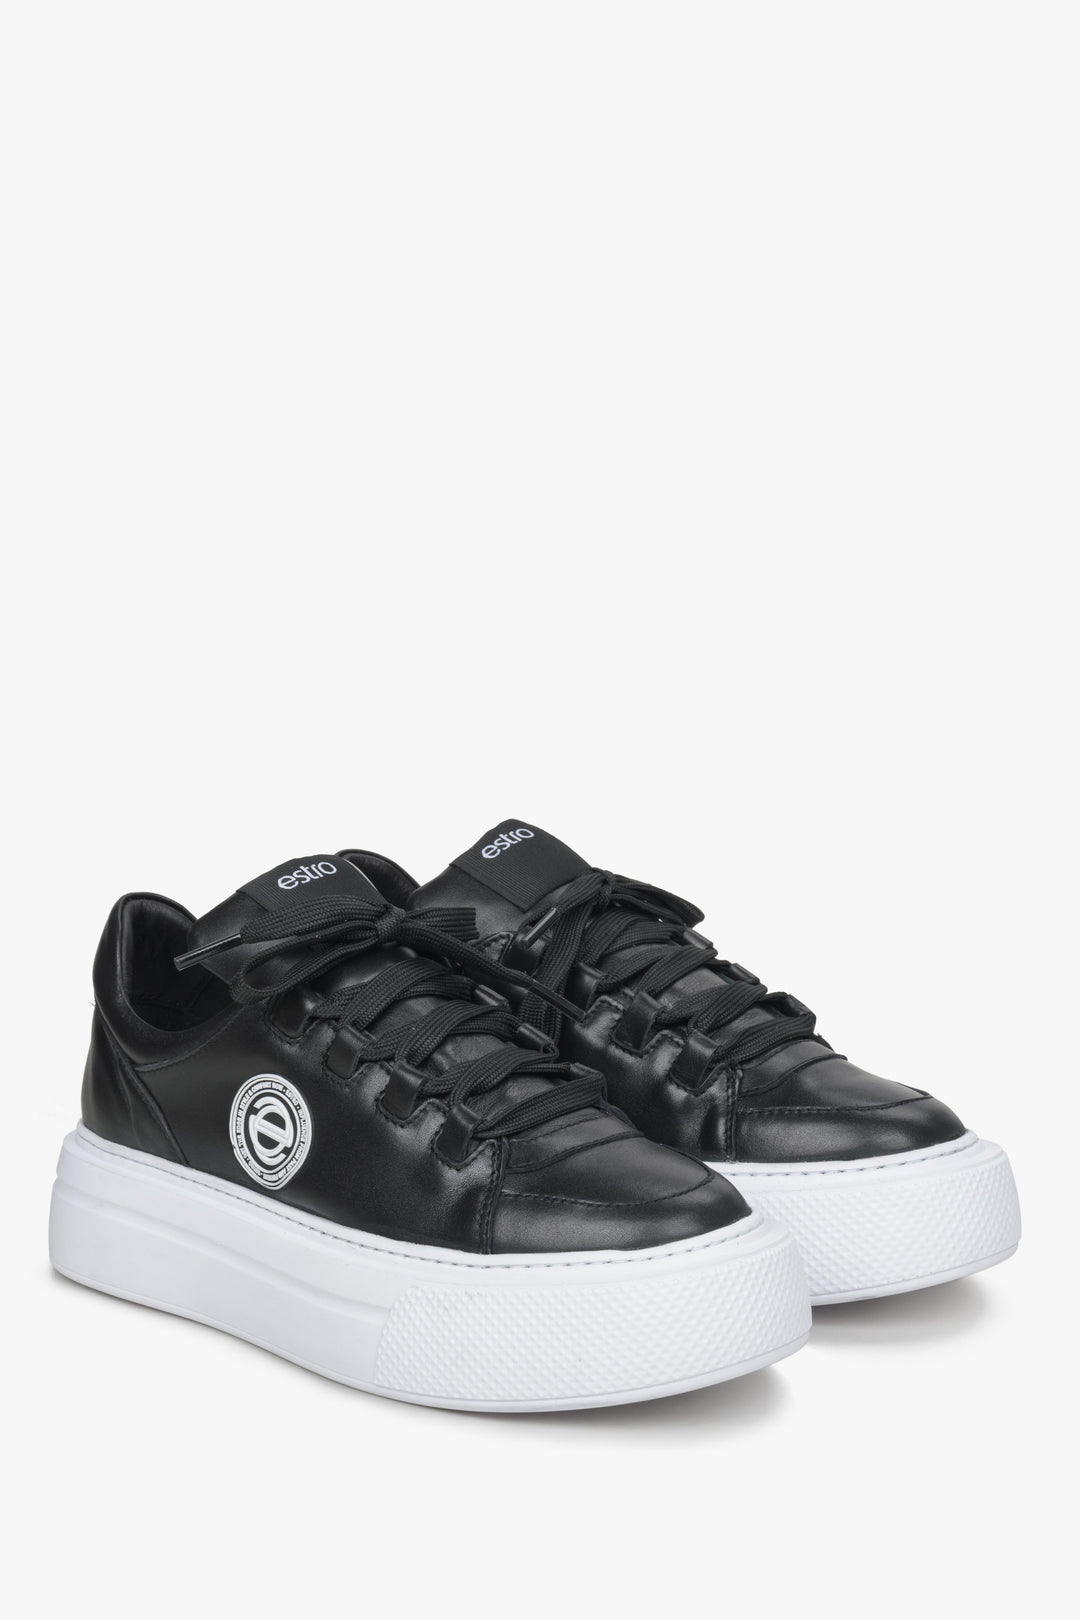 Women's black platform sneakers made of genuine leather by Estro.